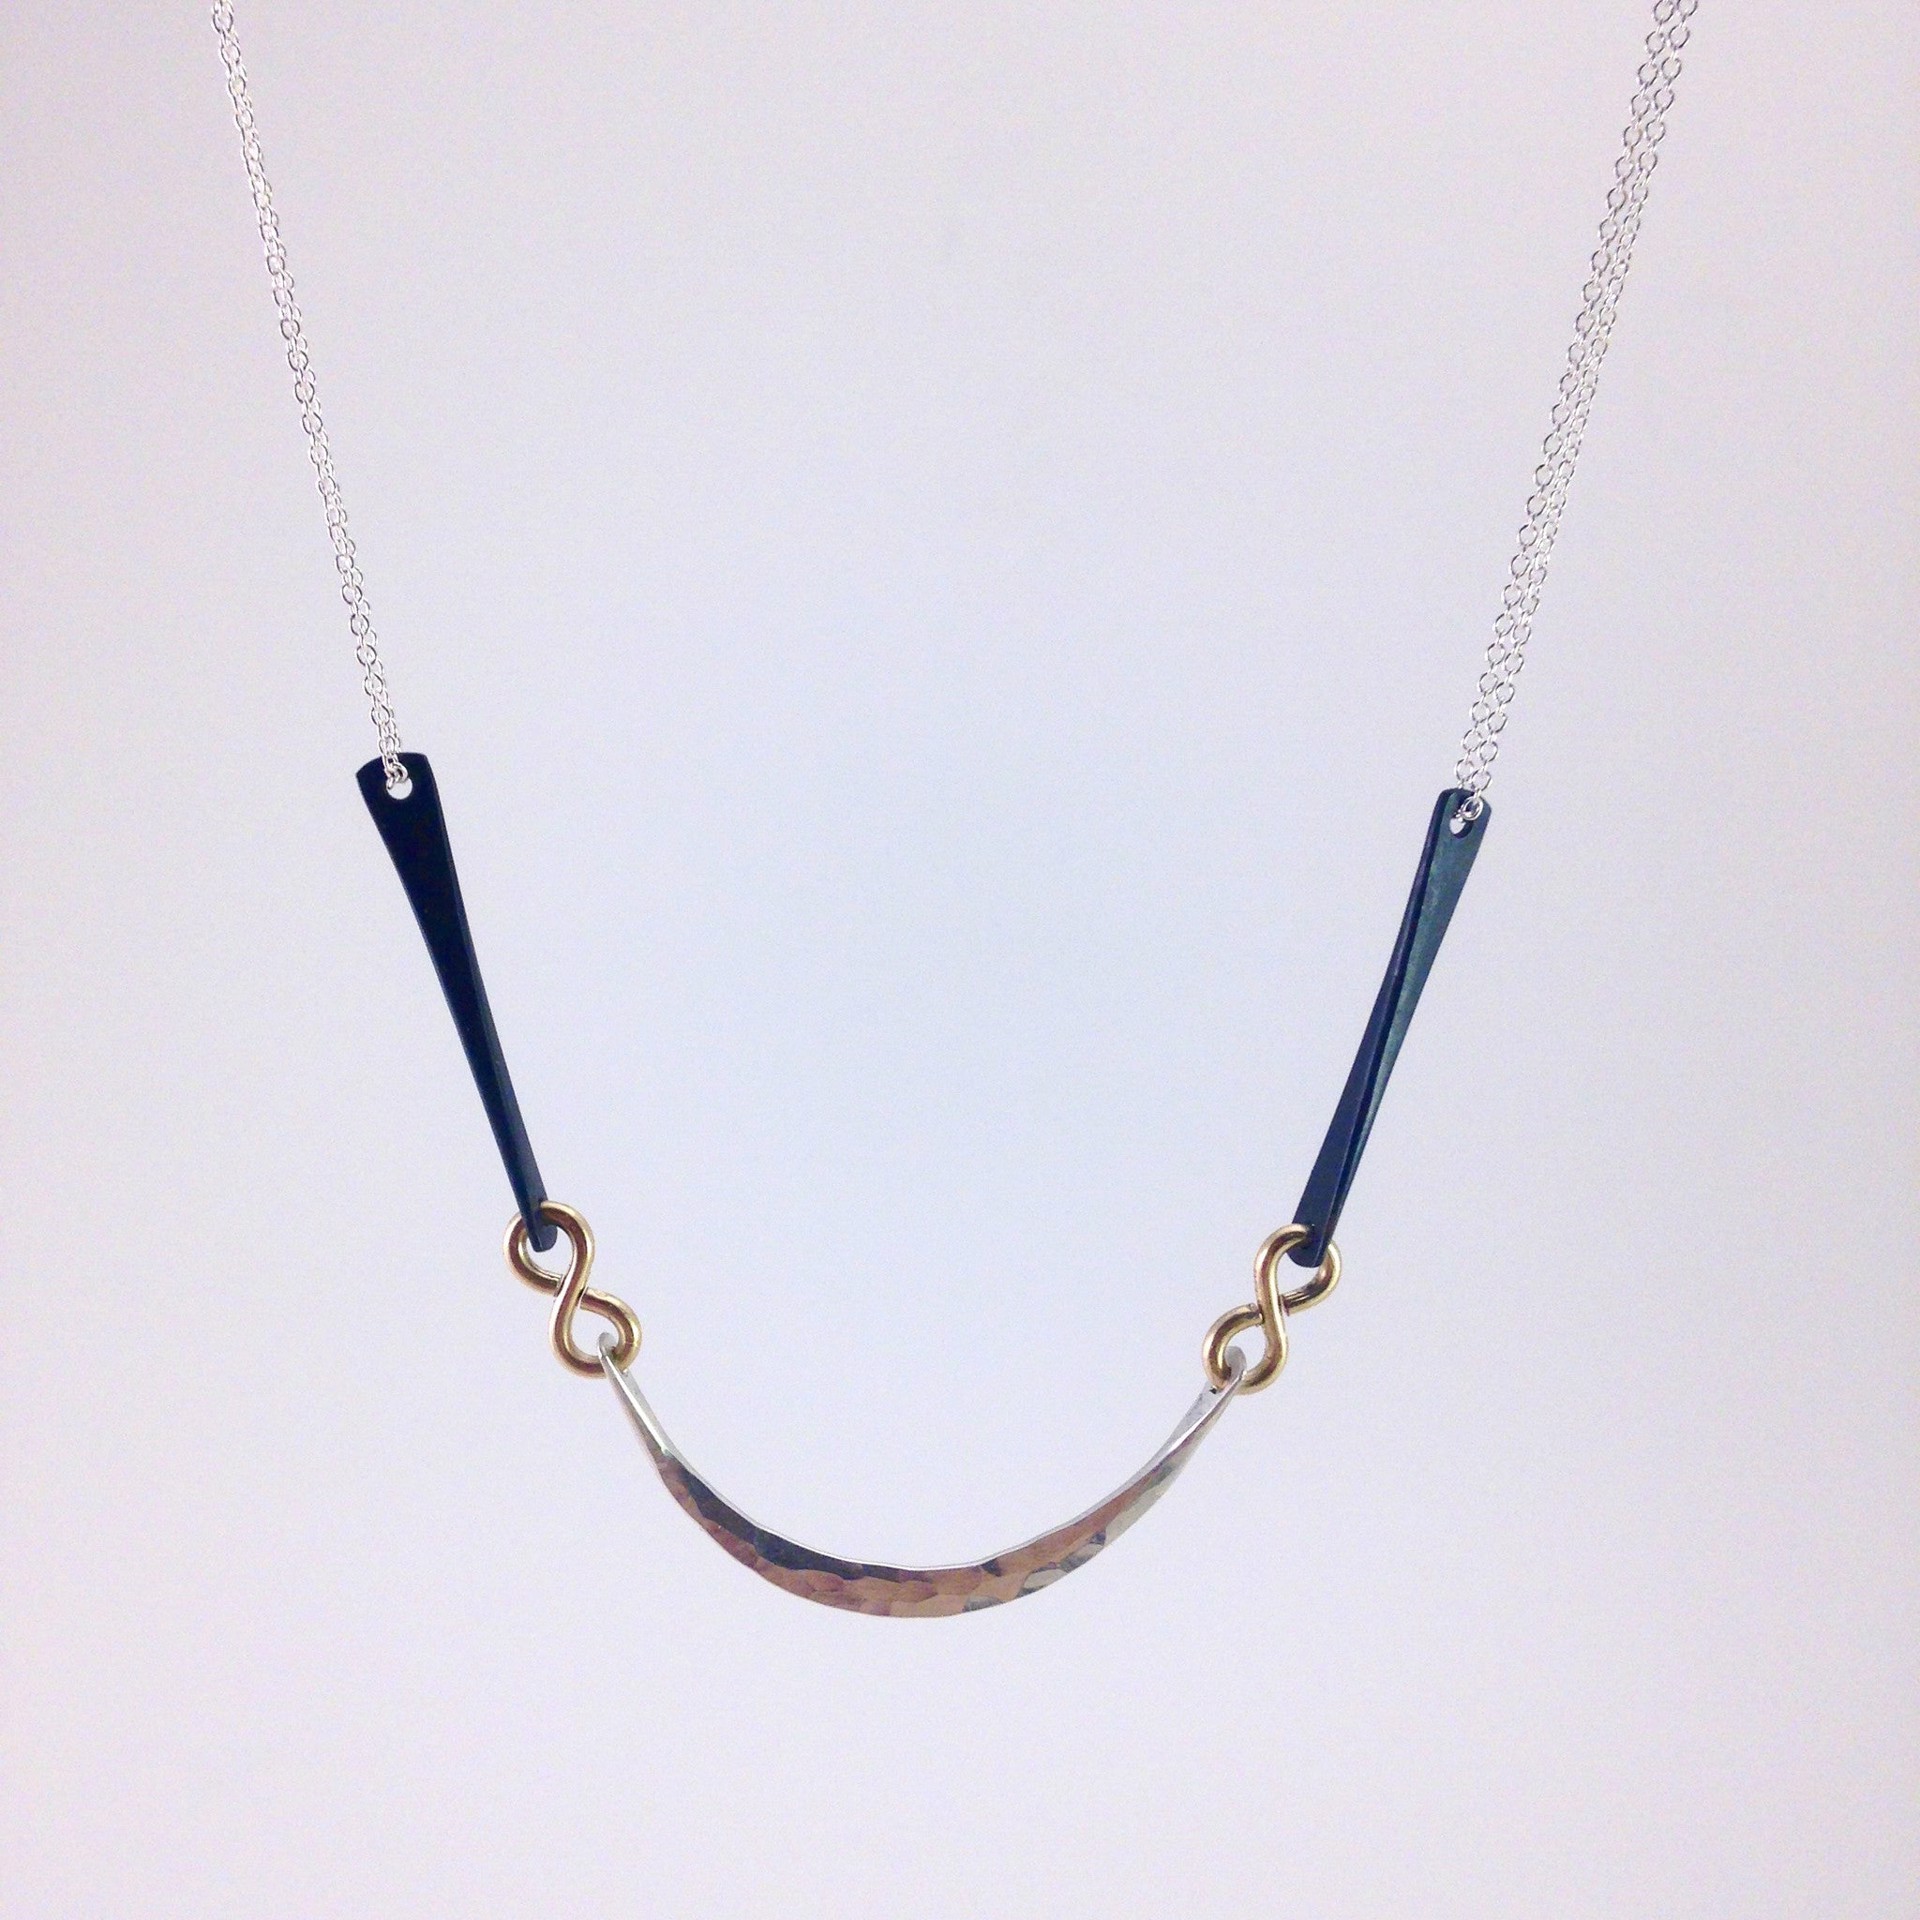 Sap Moon Necklace by Clementine & Co. Jewelry